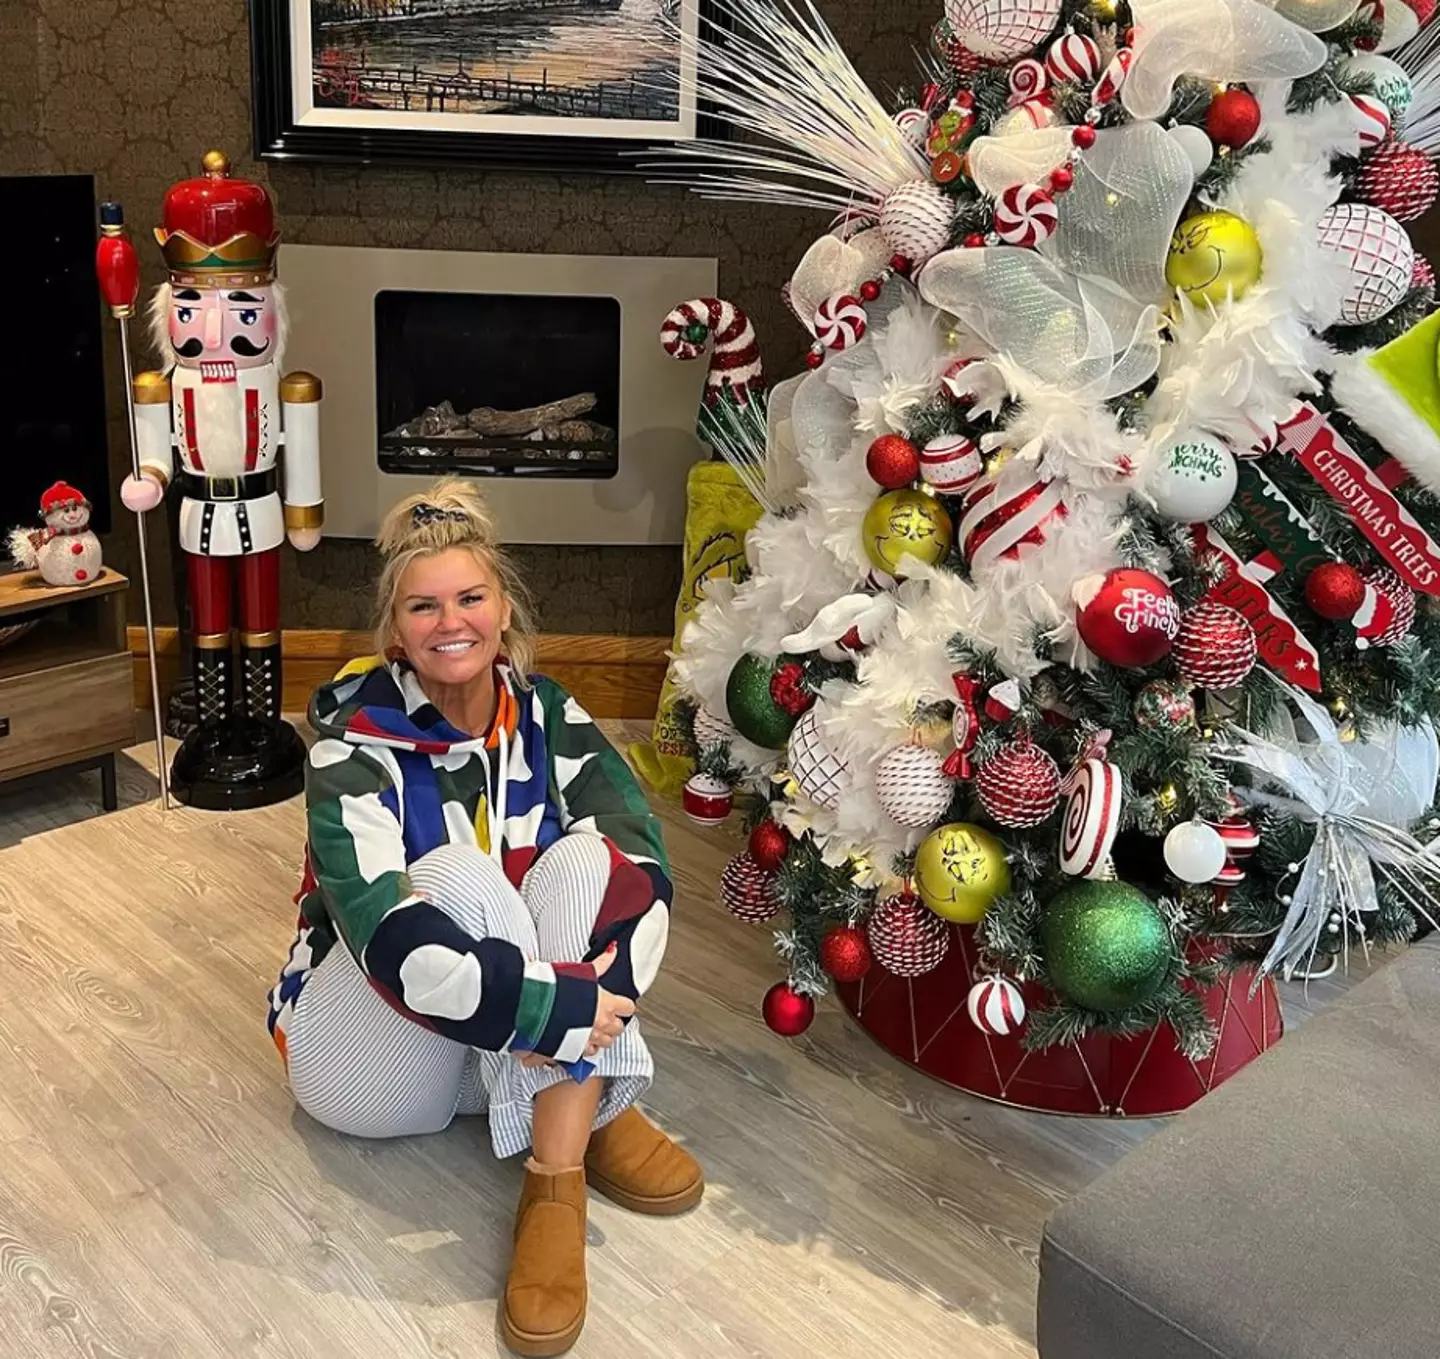 The Atomic Kitten star showed off her massive Grinch-themed Xmas tree.